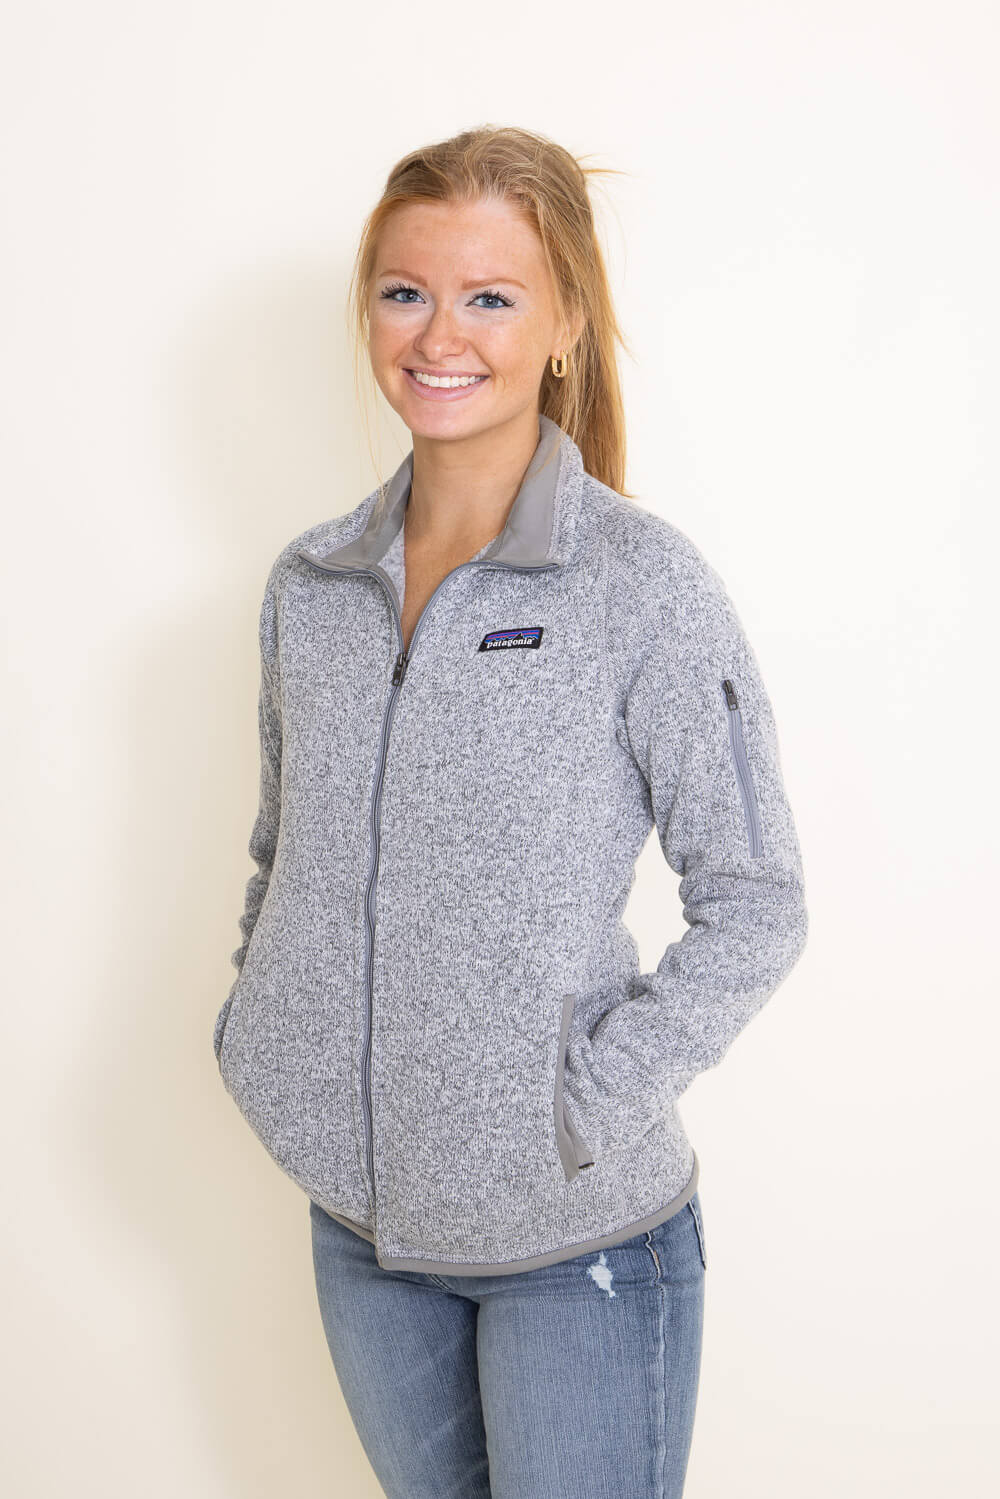 Patagonia Women Clothing & Accessories